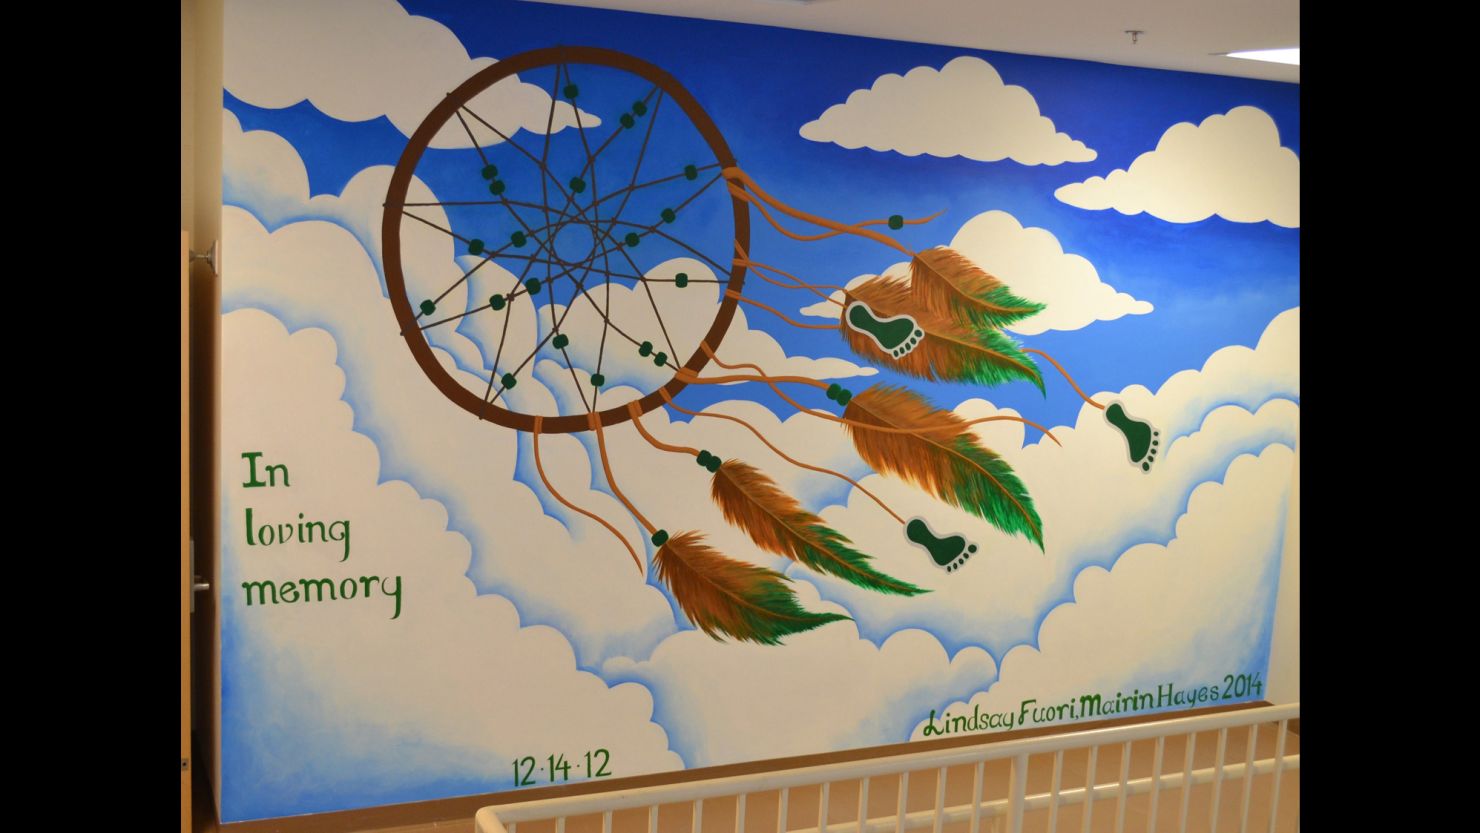 A mural painted in honor of the victims of the Sandy Hook massacre was covered over.